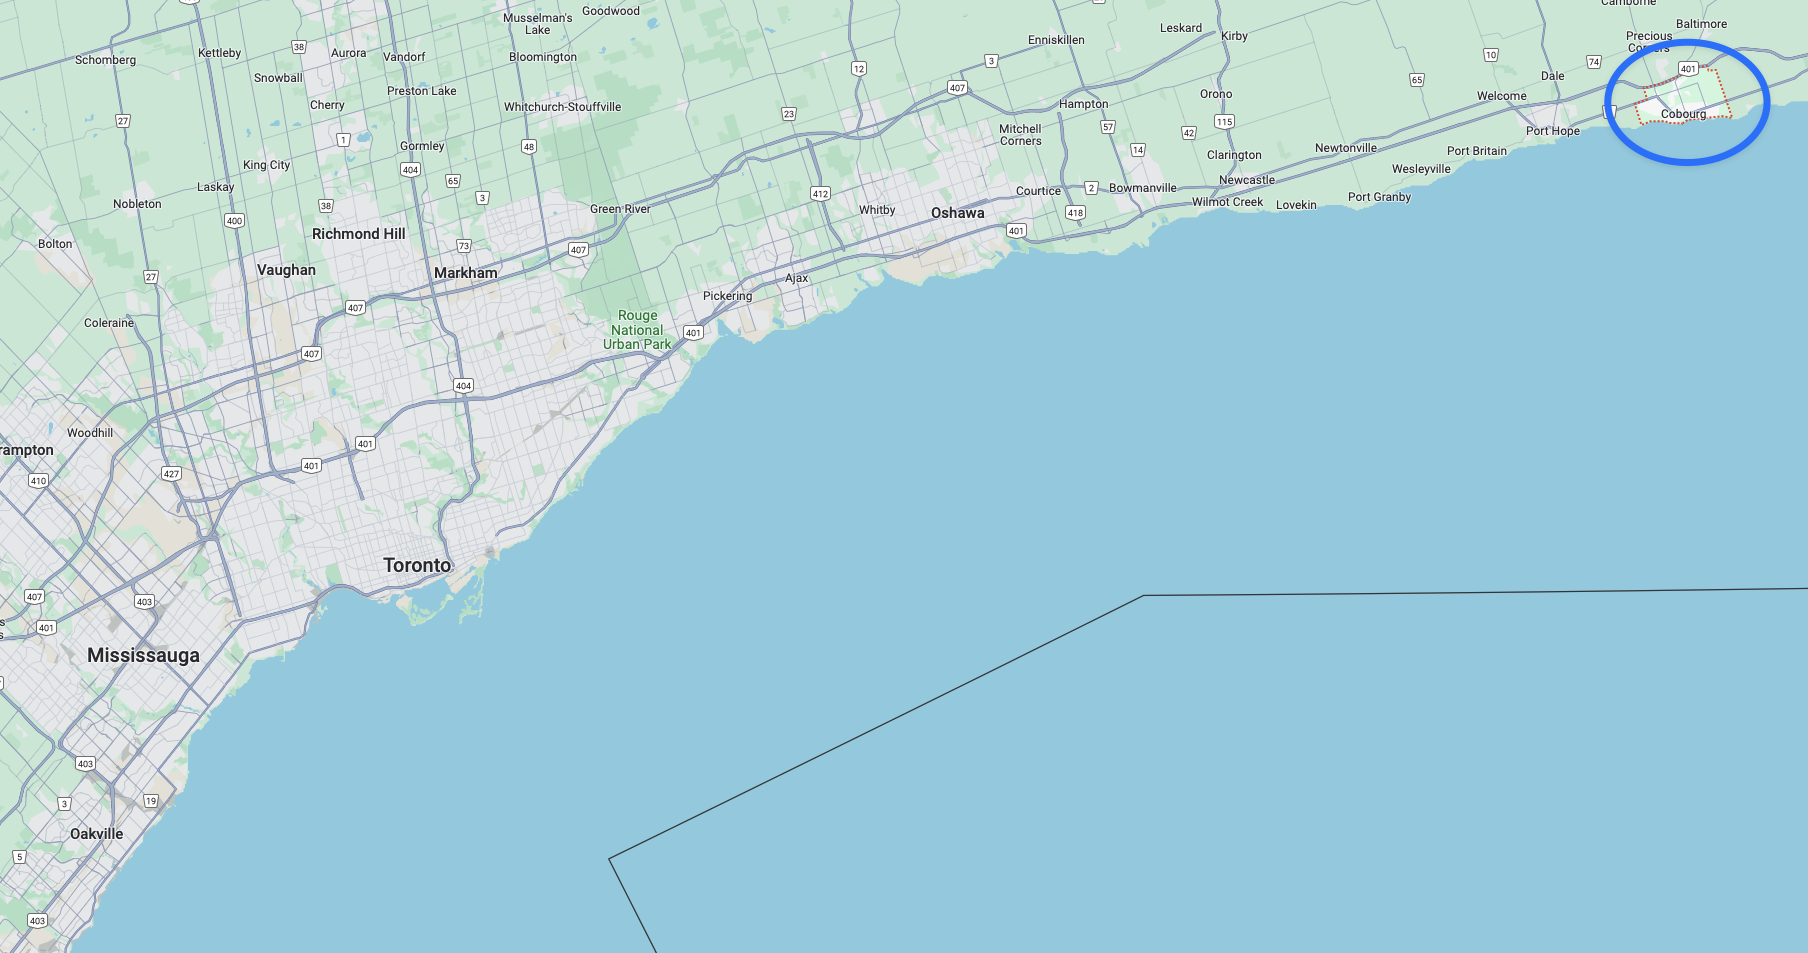 Google Maps image of Cobourg in relation to Toronto